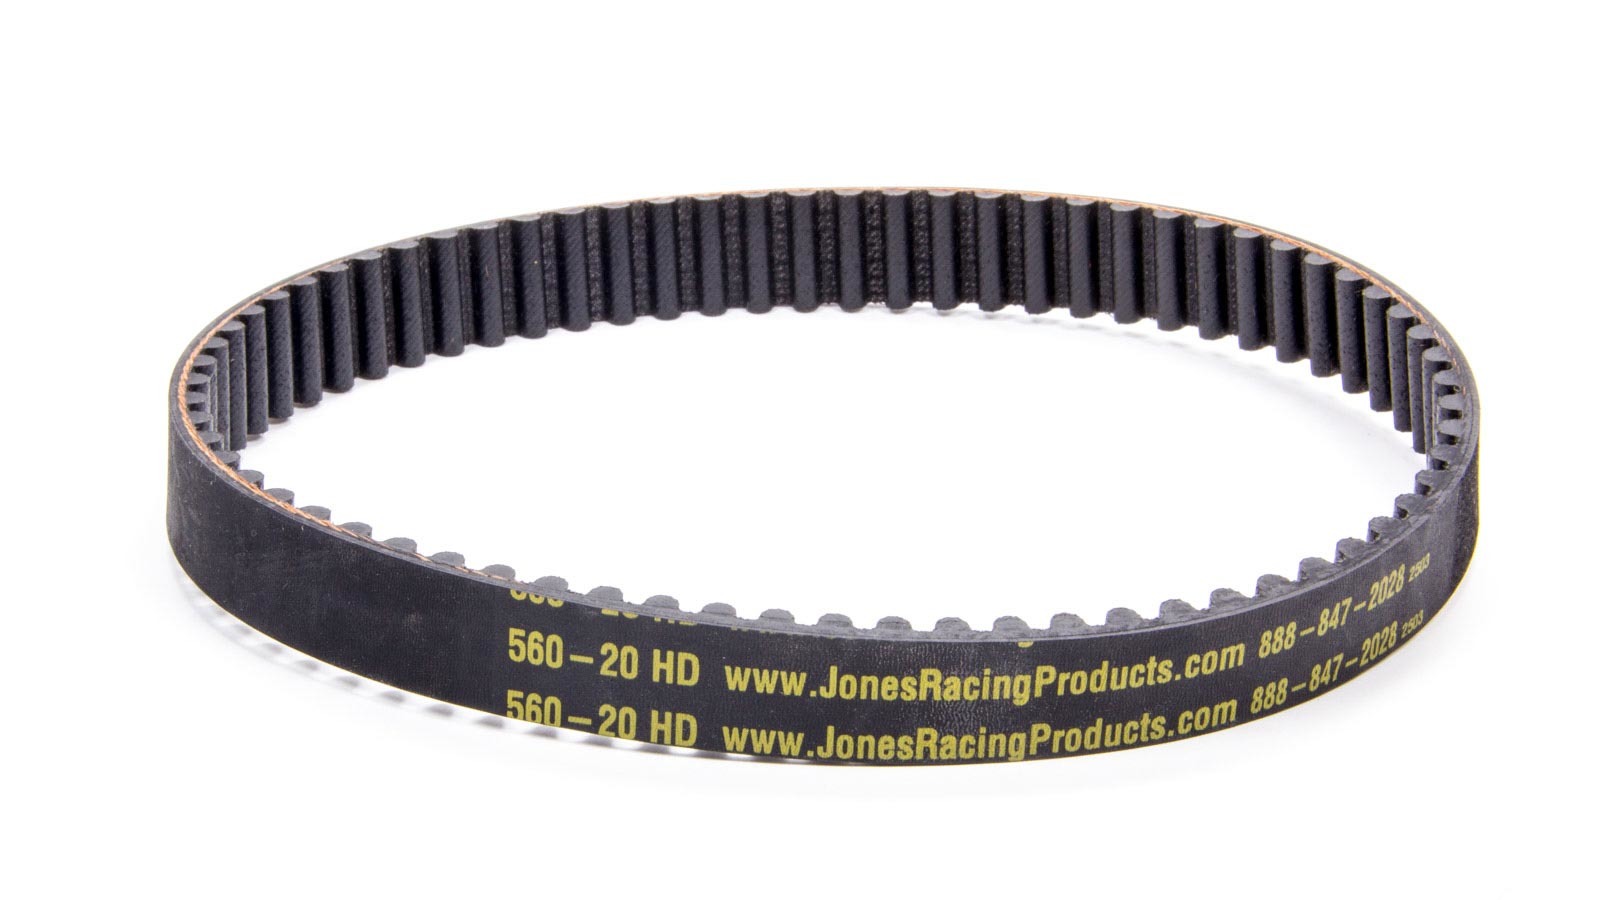 Jones Racing Products 720-20HD HTD Drive Belt, 28.350 in Long, 20 mm Wide, 8 mm Pitch, Each